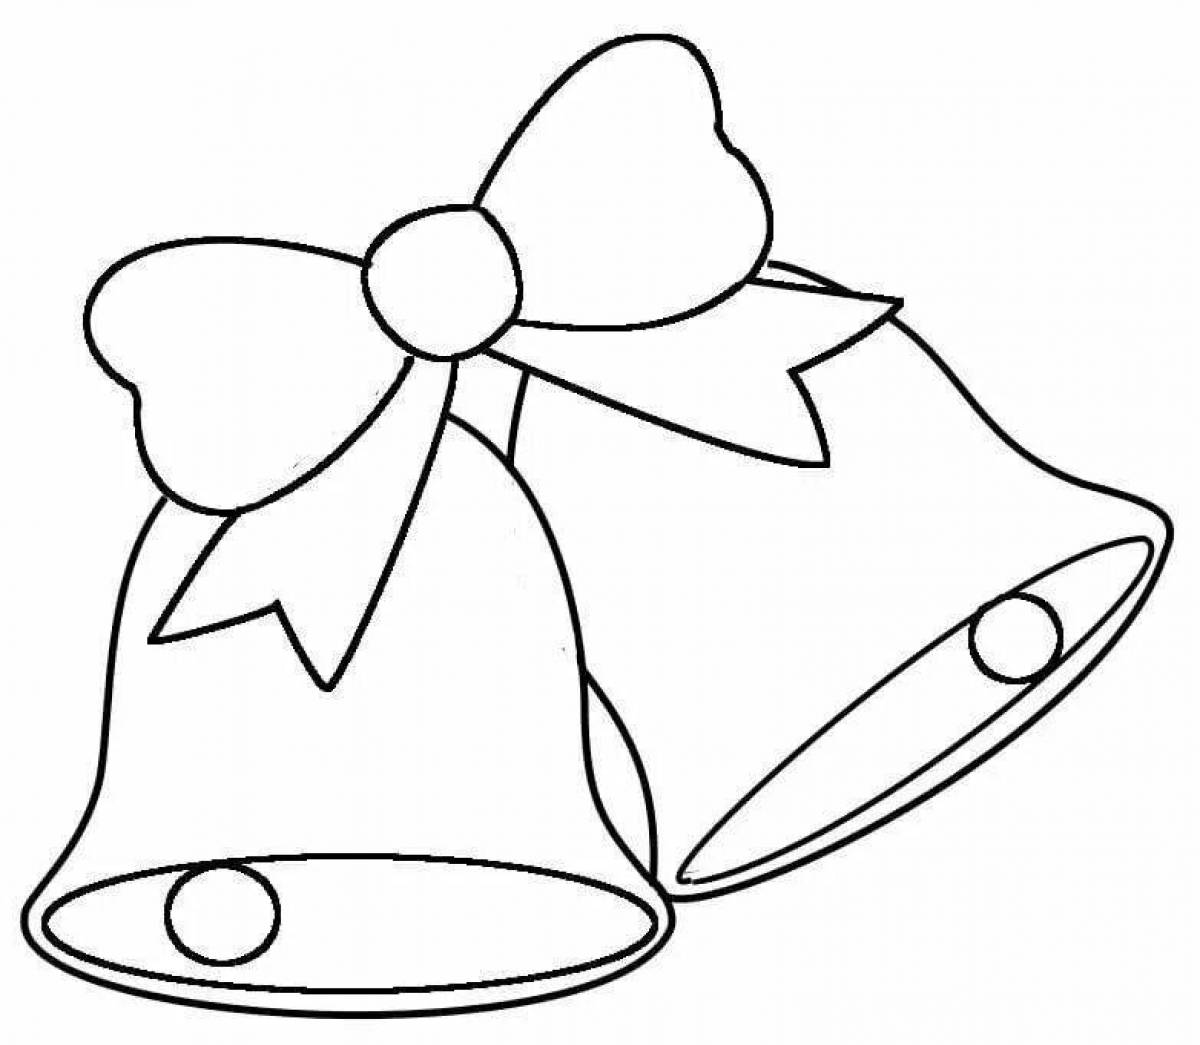 Color coloring page for calls